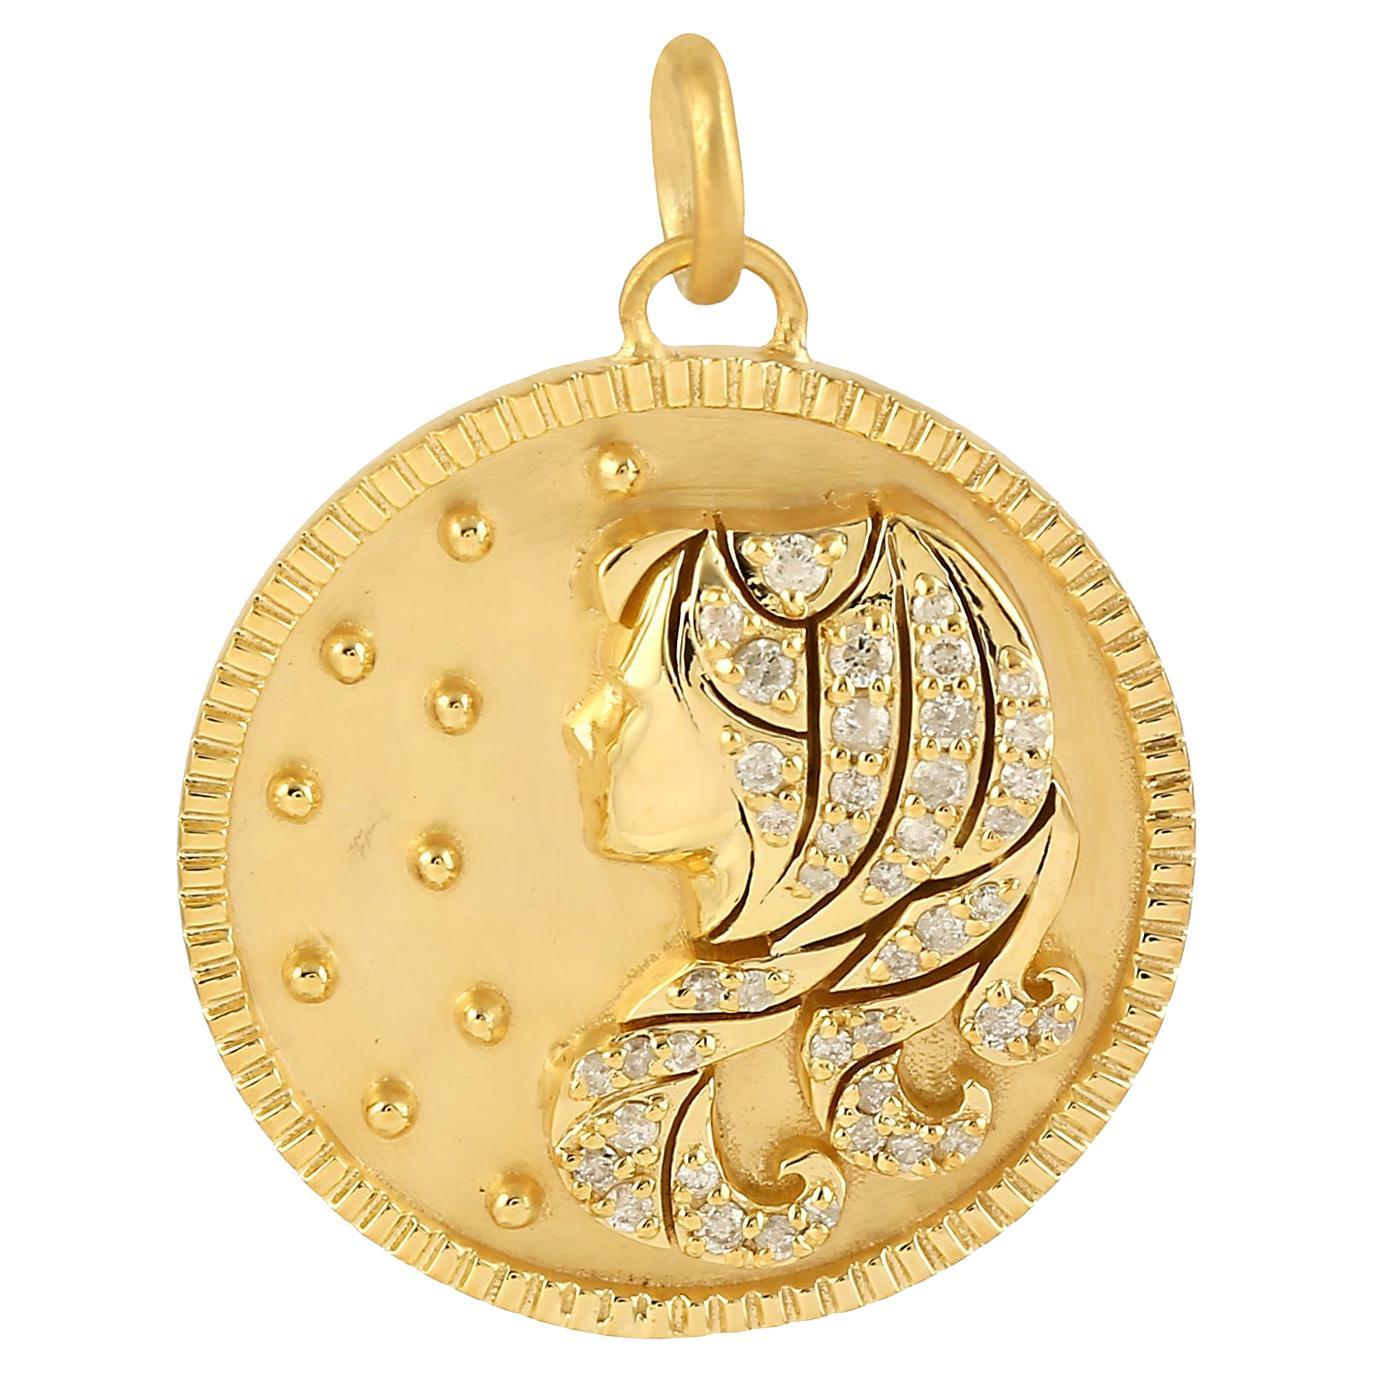 Virgo Zodiac Charm Pendant with Natural Pave Diamonds Made in 14k Yellow Gold